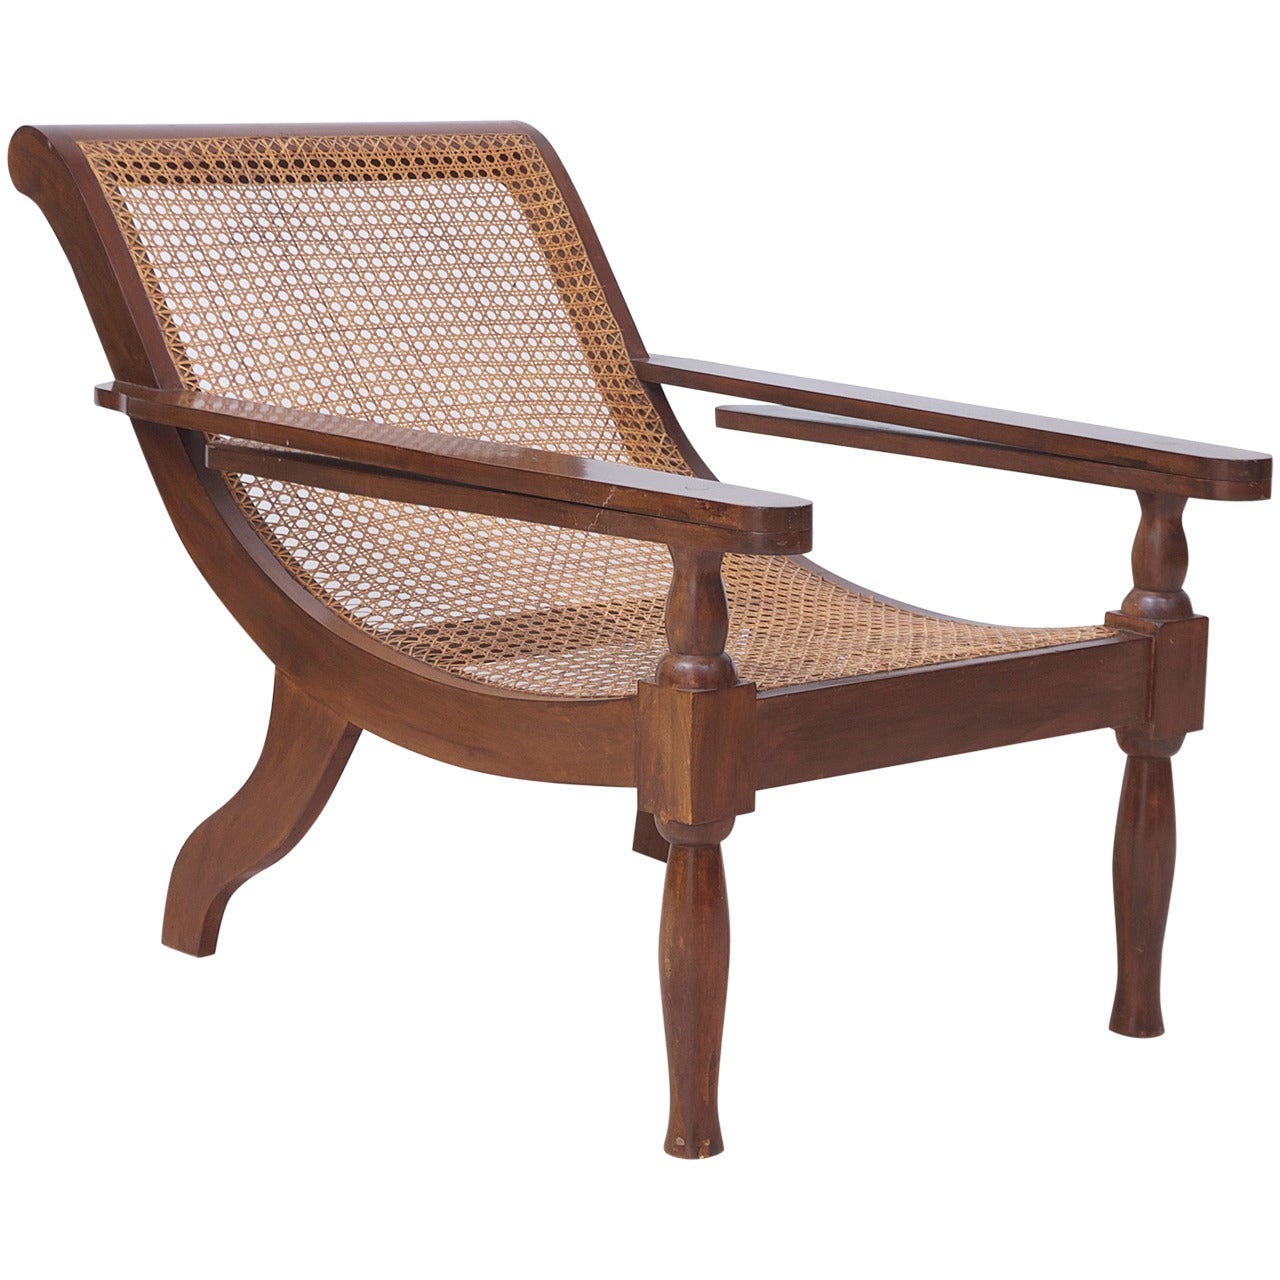 West Indies Planters Chair in Mahogany with Caning